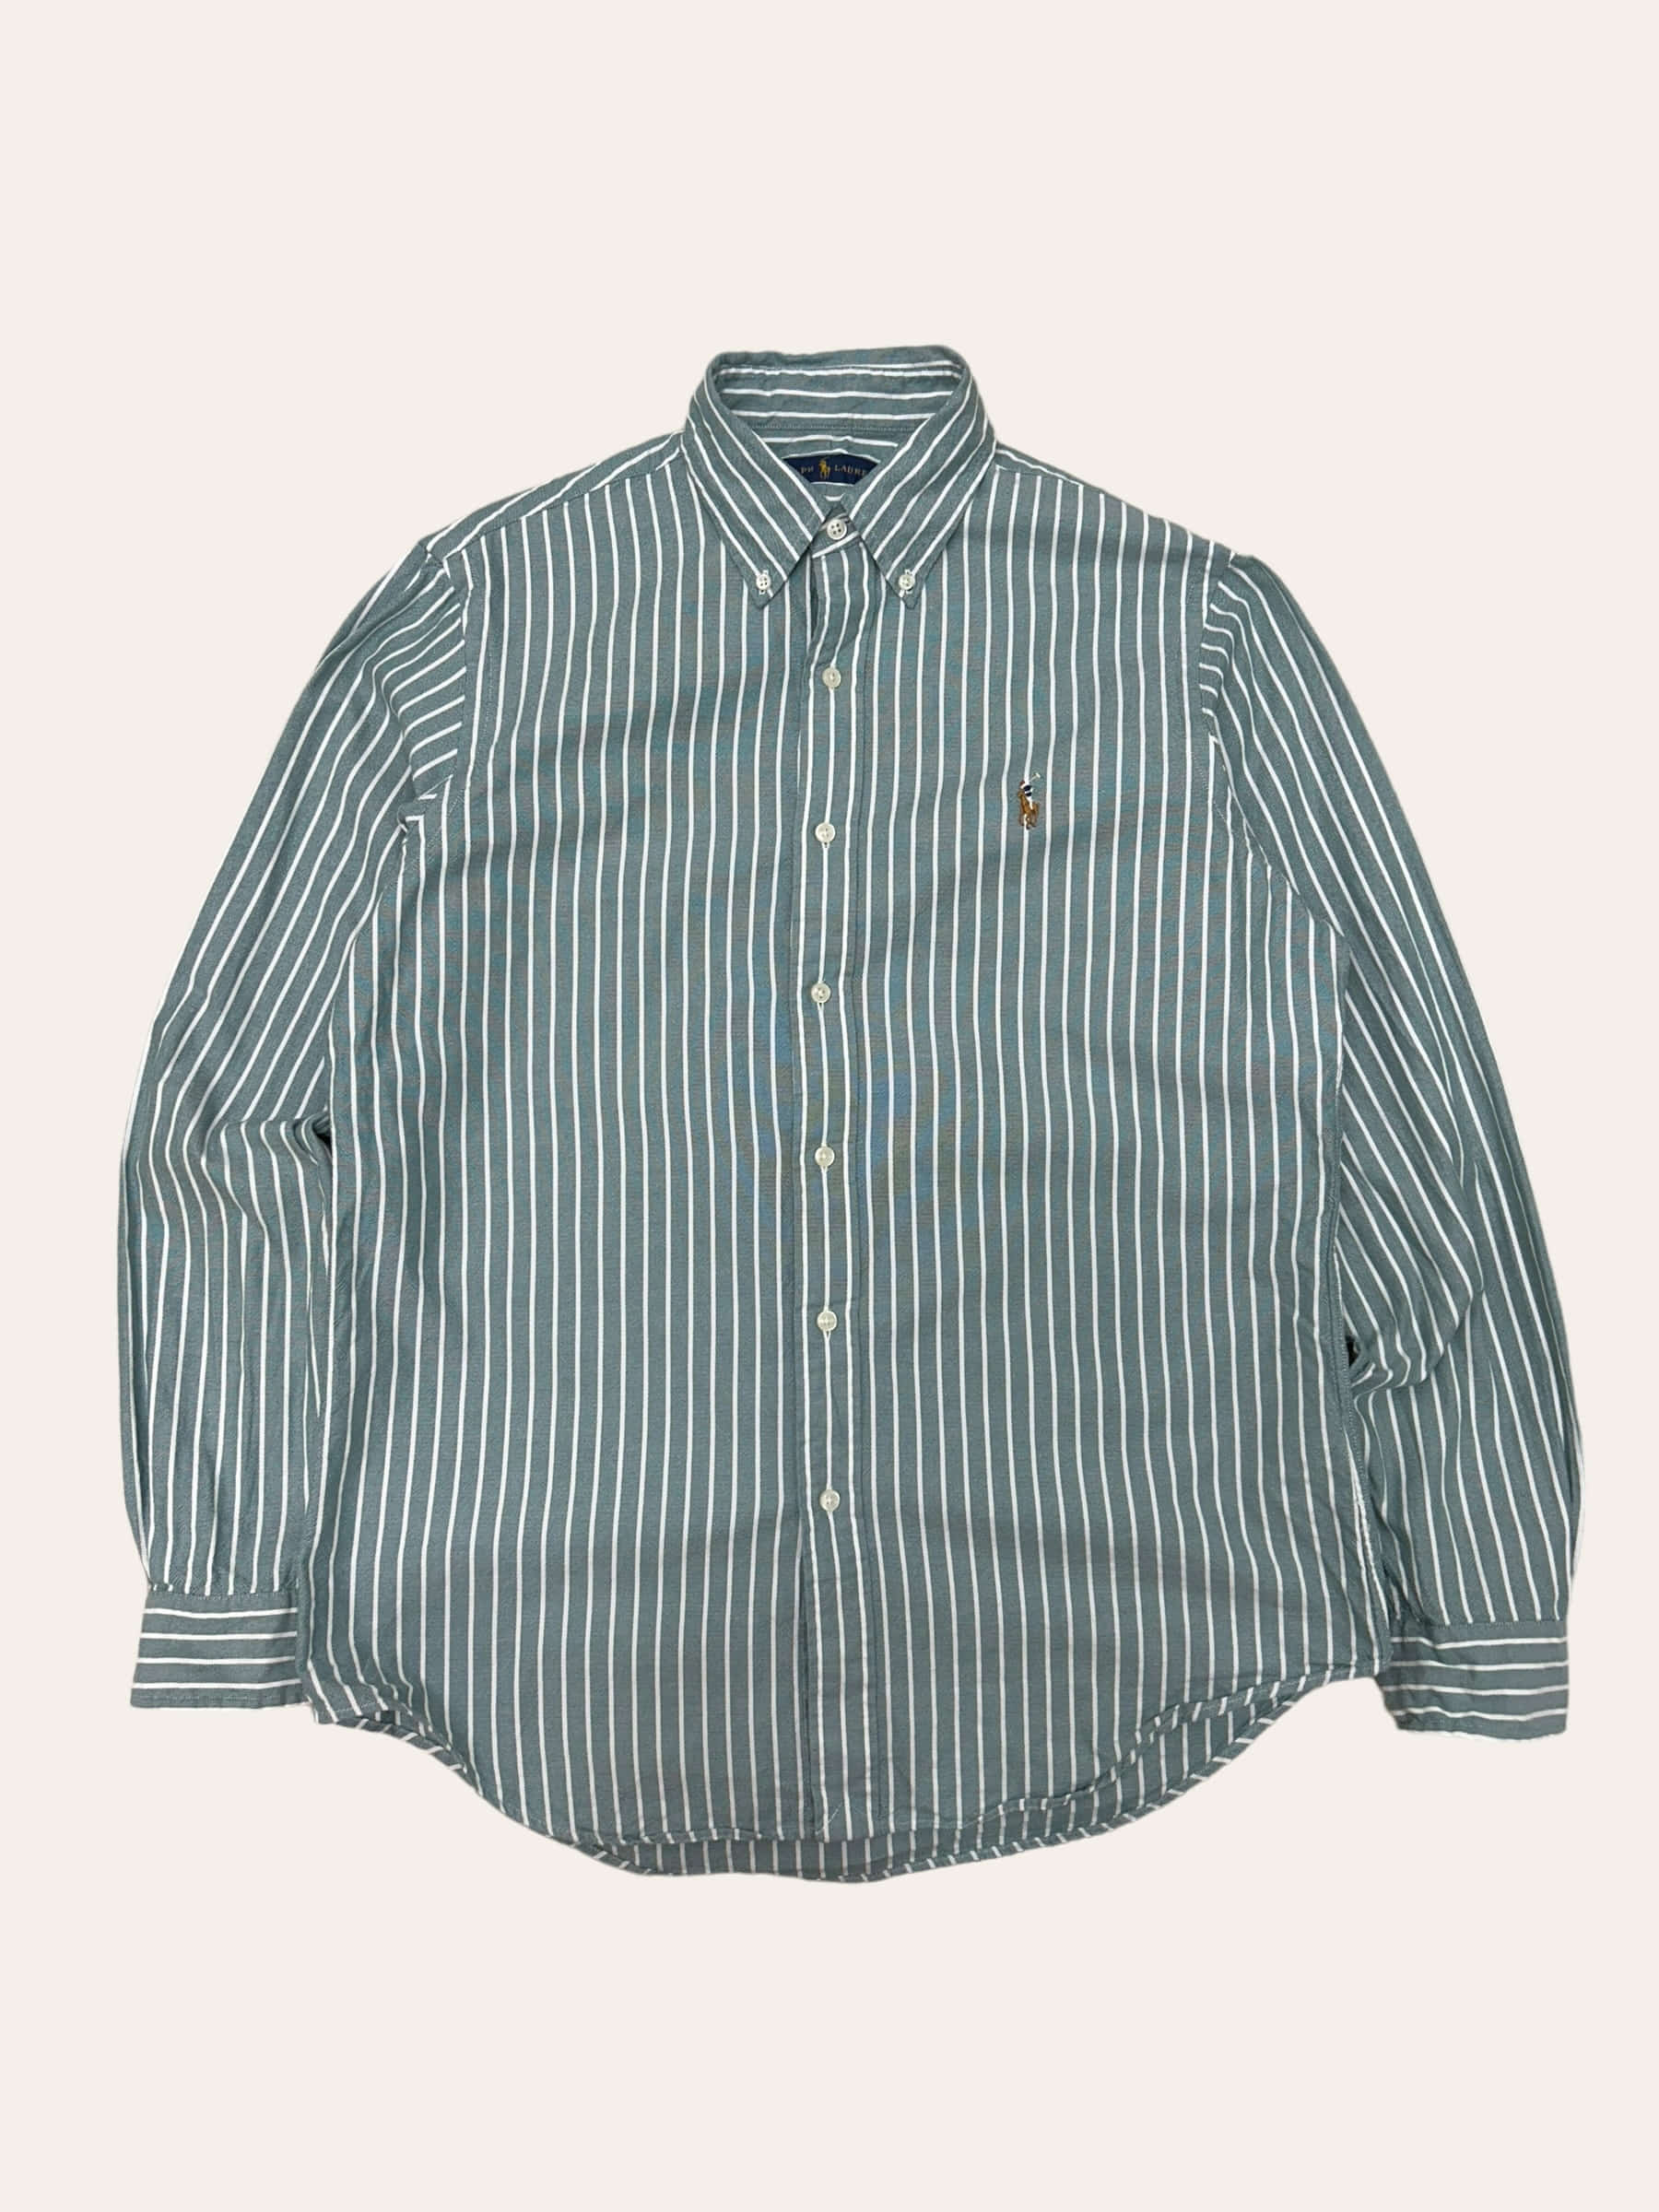 (From USA)Polo ralph lauren turquoise stripe oxford shirt M